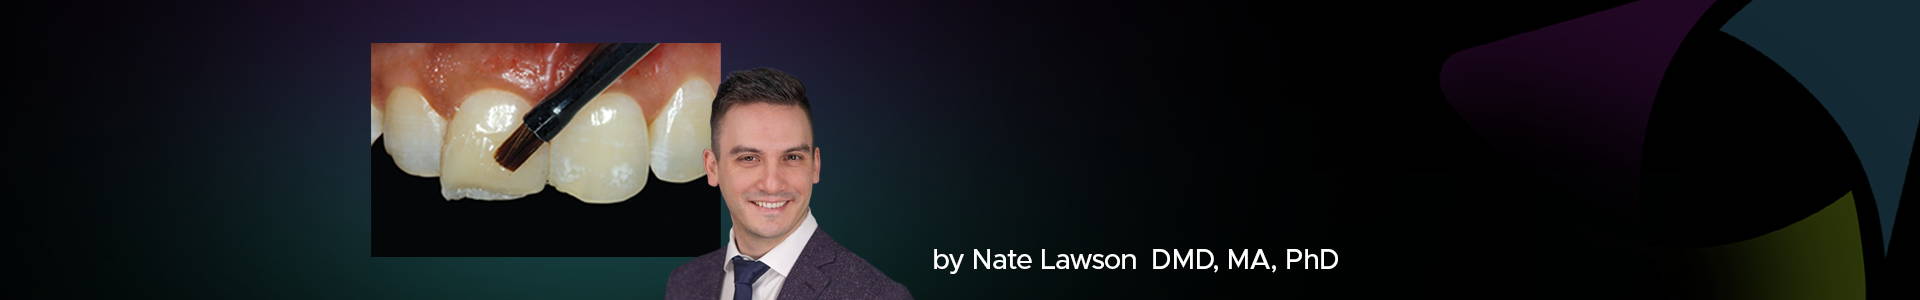 blog banner featuring Dr Nate Lawson and a clinical image in the back